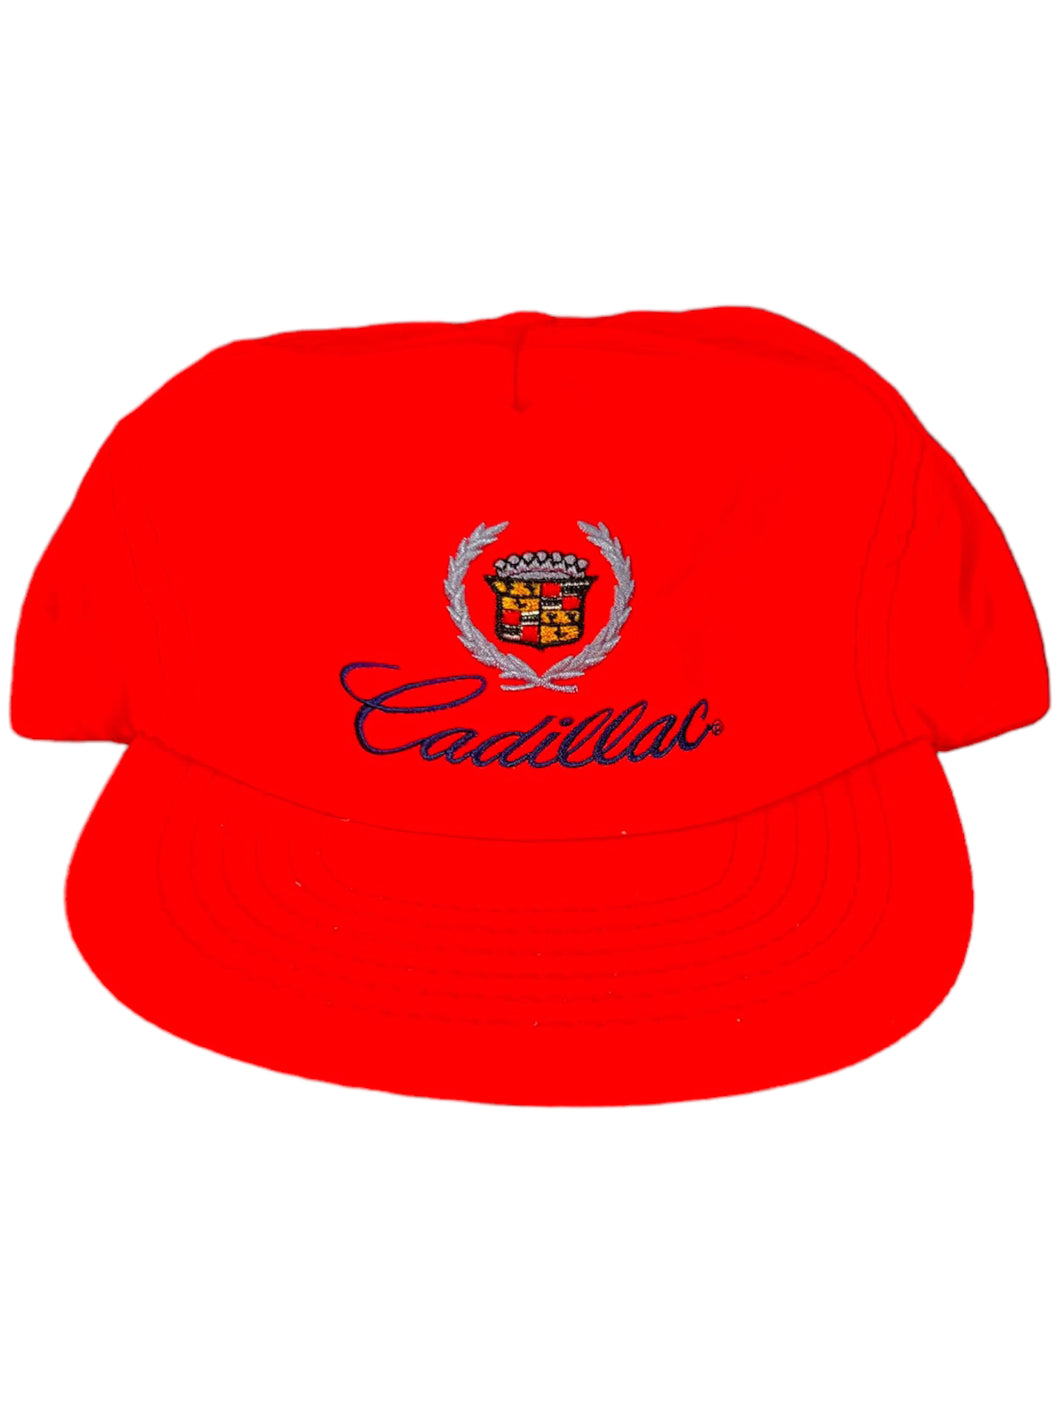 Vintage 80s Cadillac crest neon Union made Strap Back hat